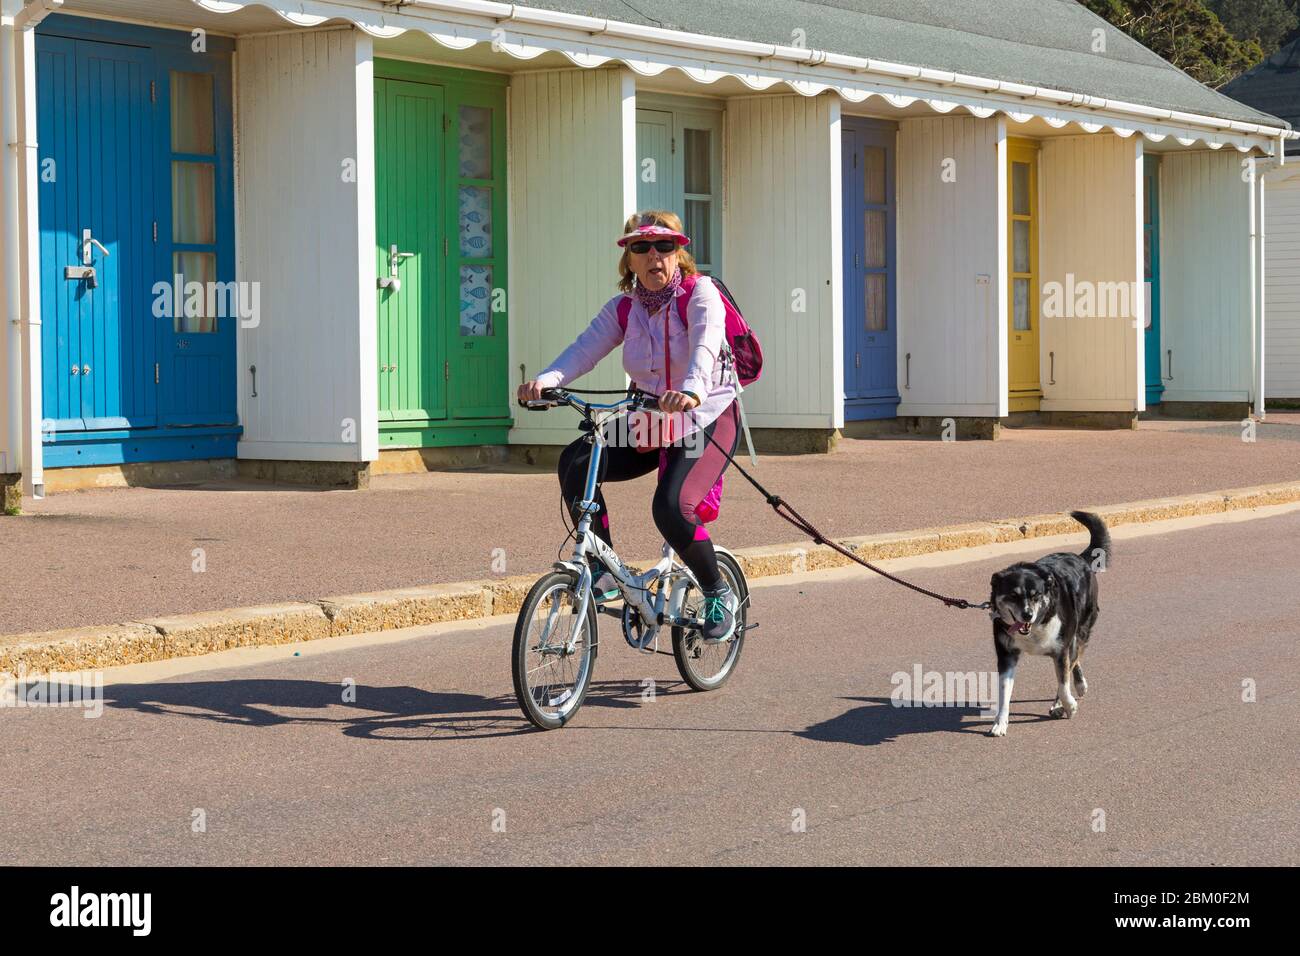 Bournemouth, Dorset UK. 6th May 2020. UK weather: lovely warm sunny day with temperatures rising ready for the long bank holiday weekend.  Beaches are mainly deserted with people taking their permitted exercise at the seaside, most adhering to the Coronavirus guidelines.  Woman cyclist cycling along promenade with dog on lead past beach huts - riding bike bicycle. Credit: Carolyn Jenkins/Alamy Live News Stock Photo